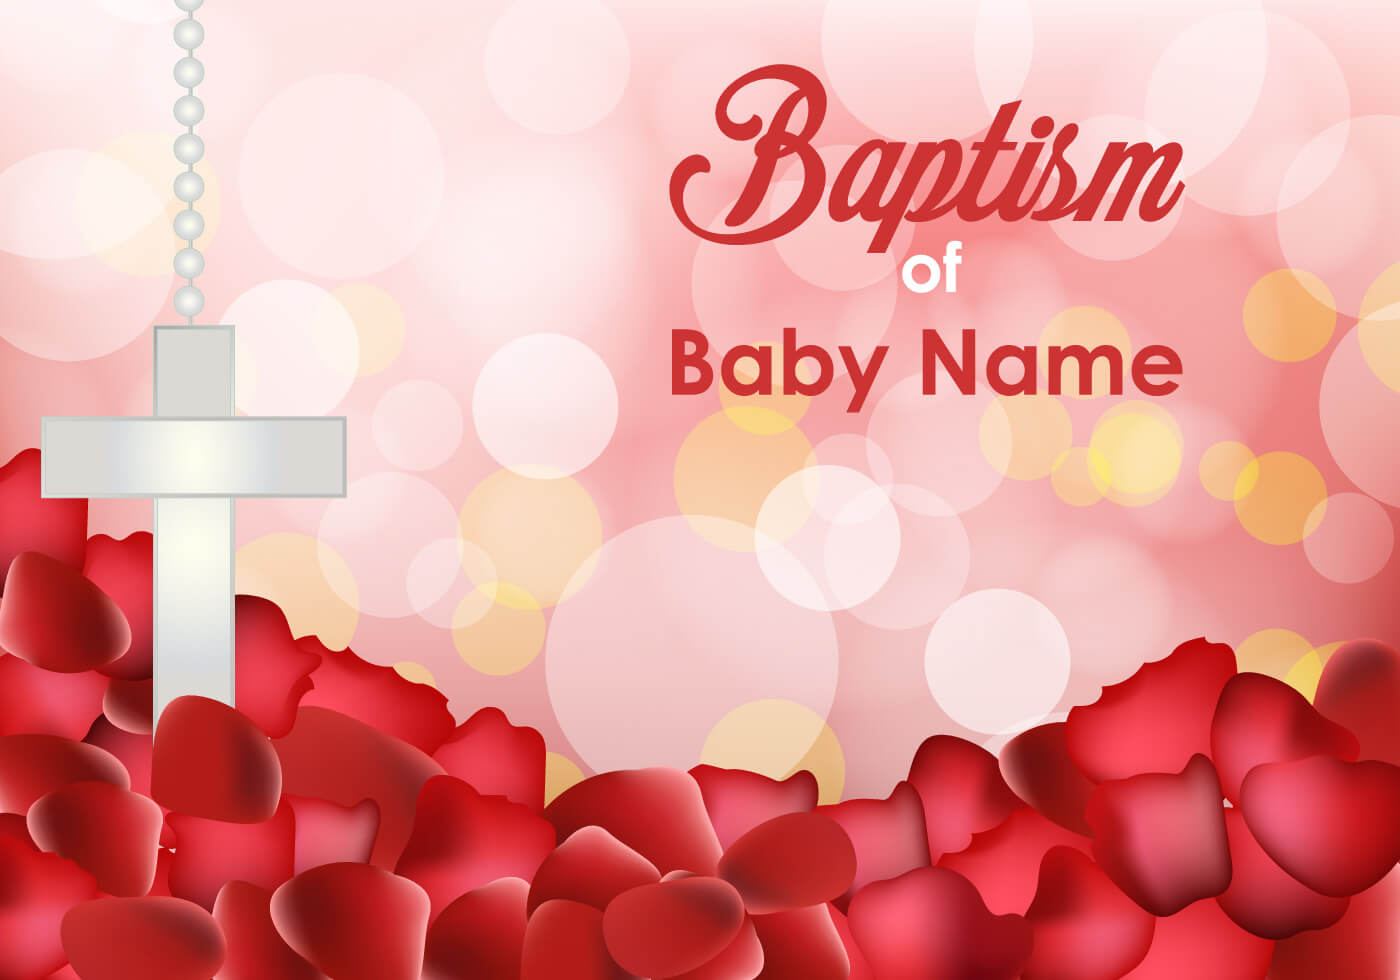 Baptism Invitation Templates – Download Free Vectors With Regard To Free Christening Invitation Cards Templates